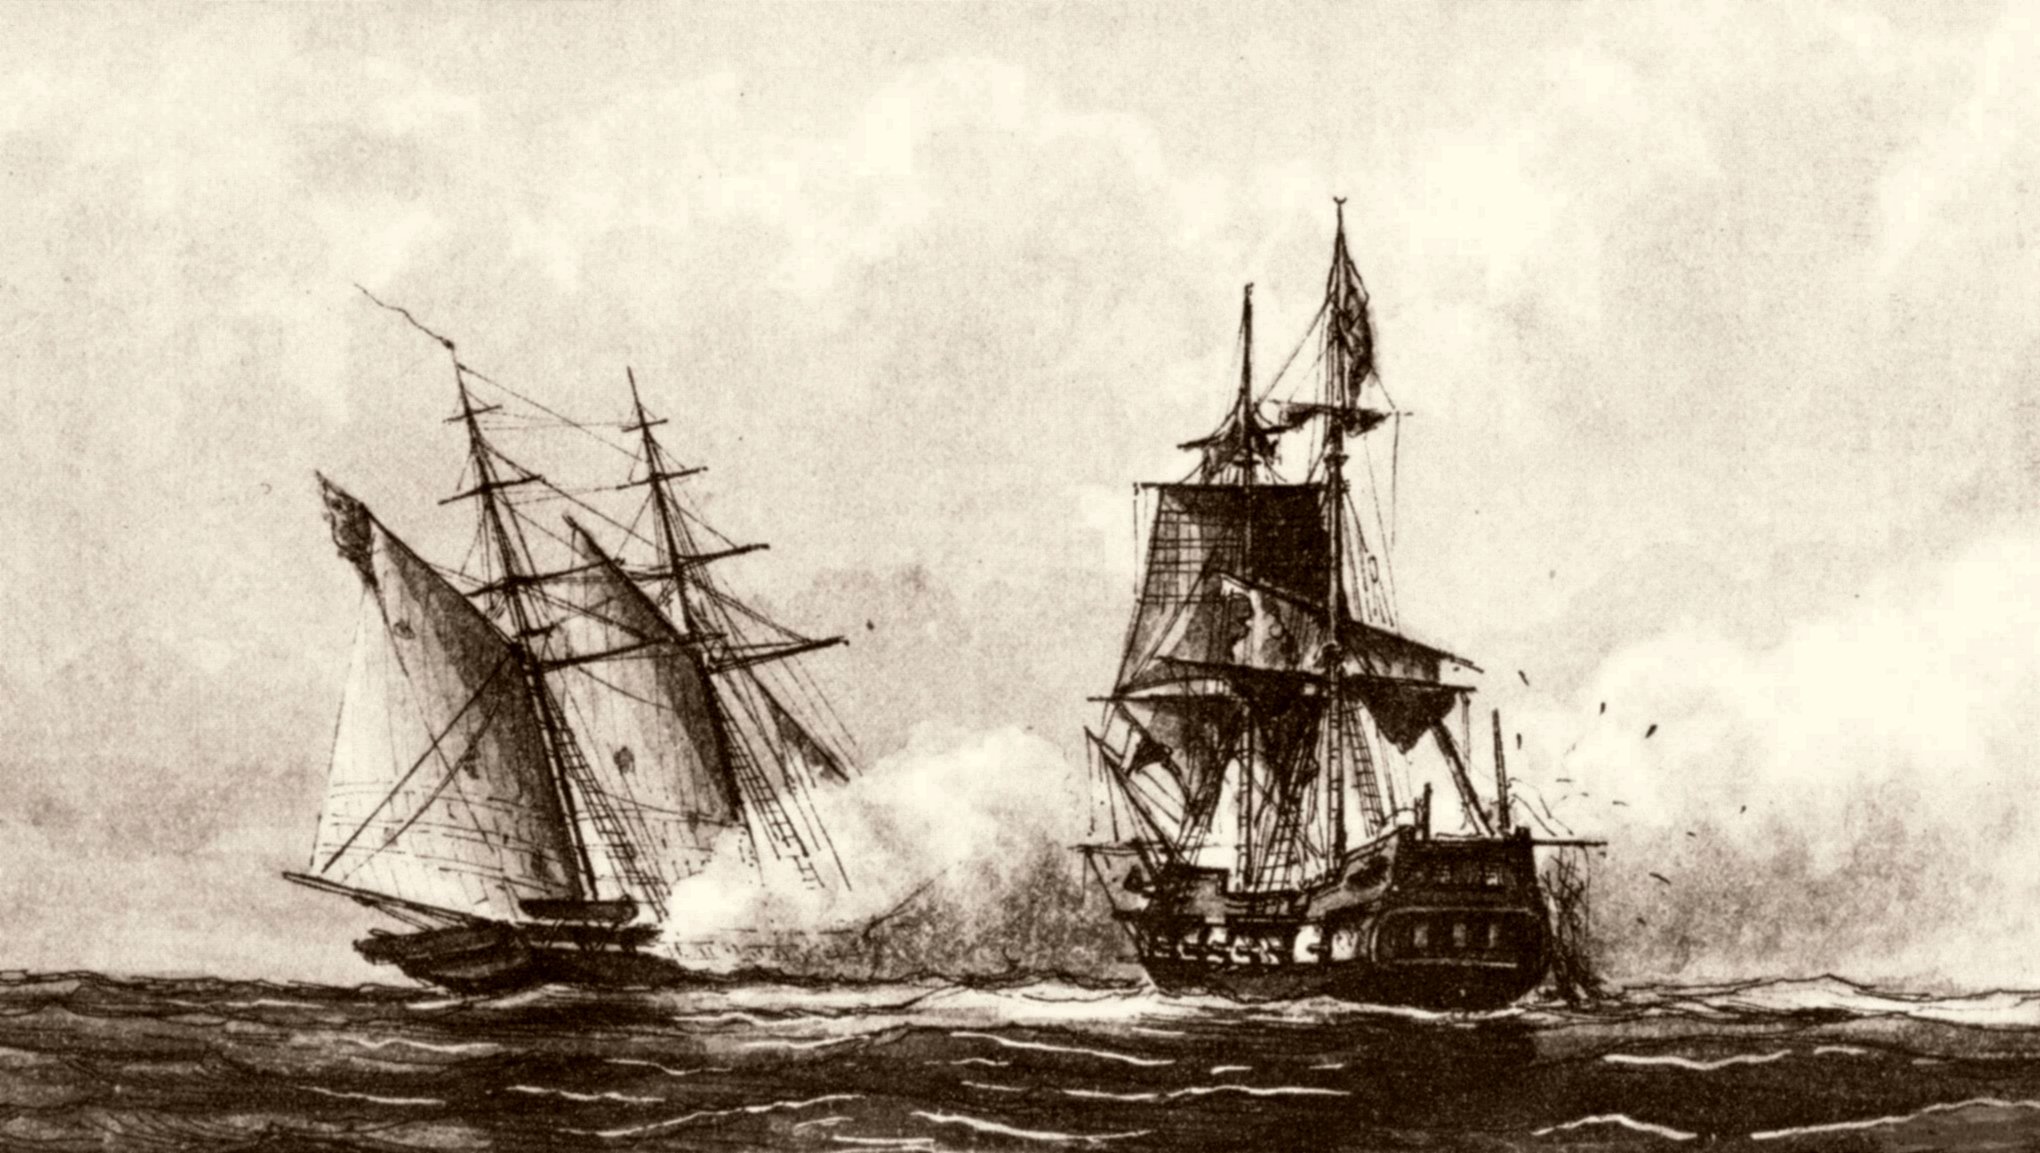 U.S.S. Enterprise capturing the Tripolitan corsair Tripoli off Malta 1 August 1801. From a drawing (c. 1878) by Capt. William Bainbridge Hoff, U.S. Navy. Photo from the U.S. National Archives.